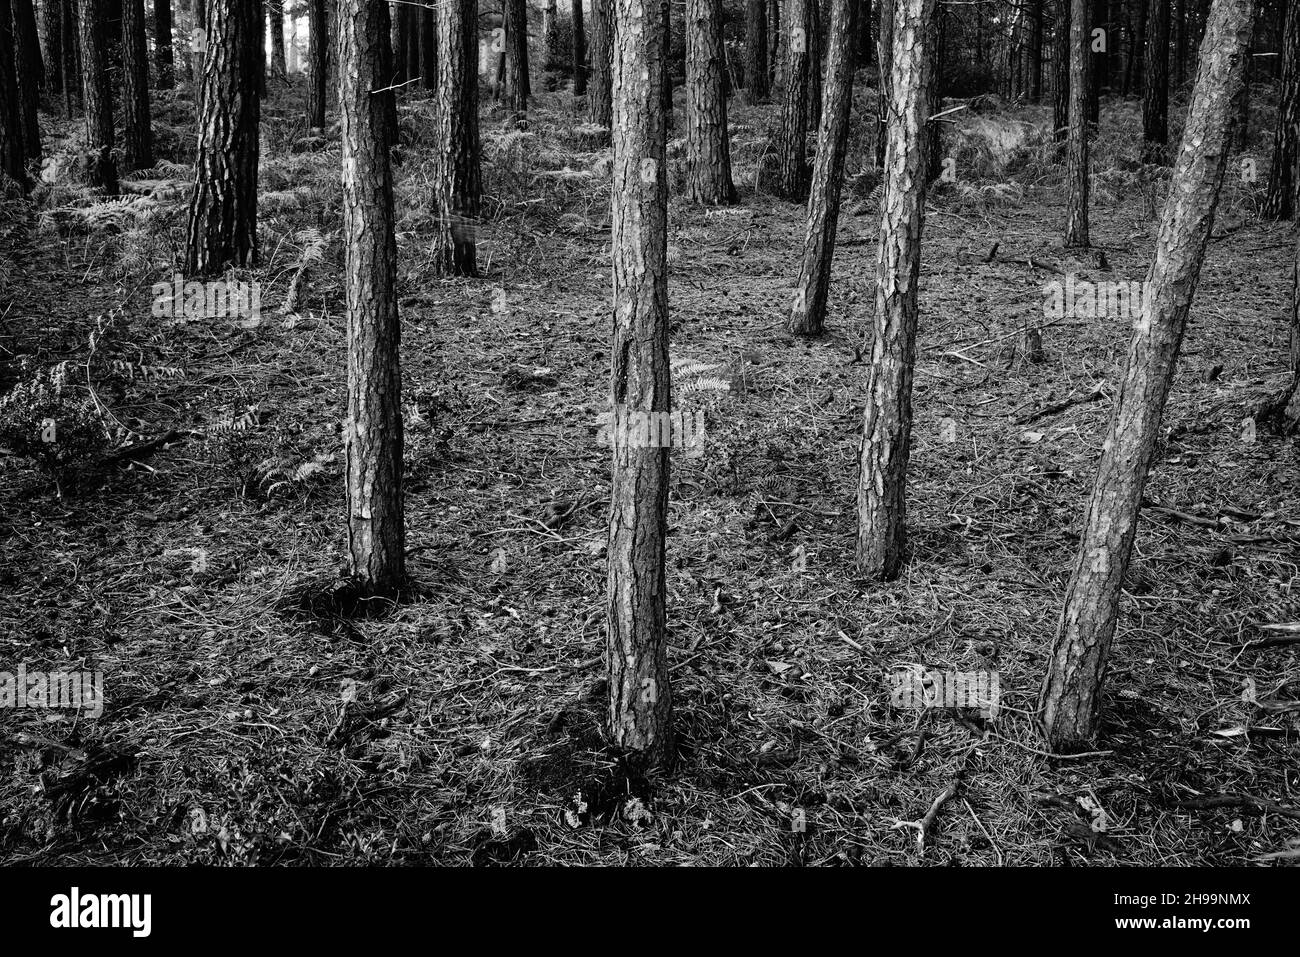 Pine tree trunks in high contrast black and white. Stock Photo